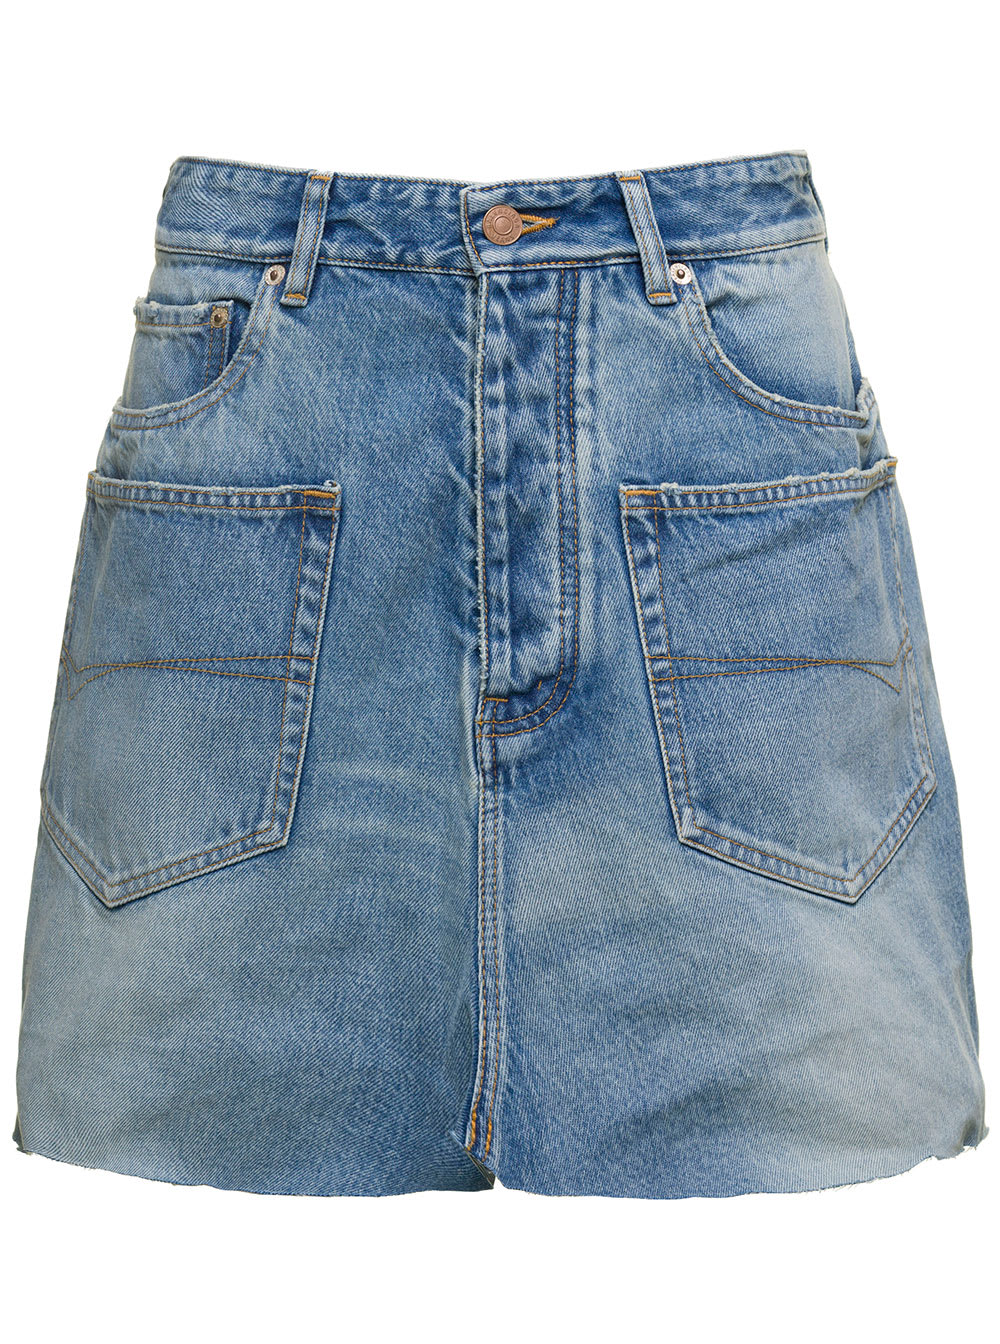 BALENCIAGA LIGHT BLUE MINI-SKIRT WITH PATCH POCKETS AND RAW EDGE IN COTTON DENIM WOMAN